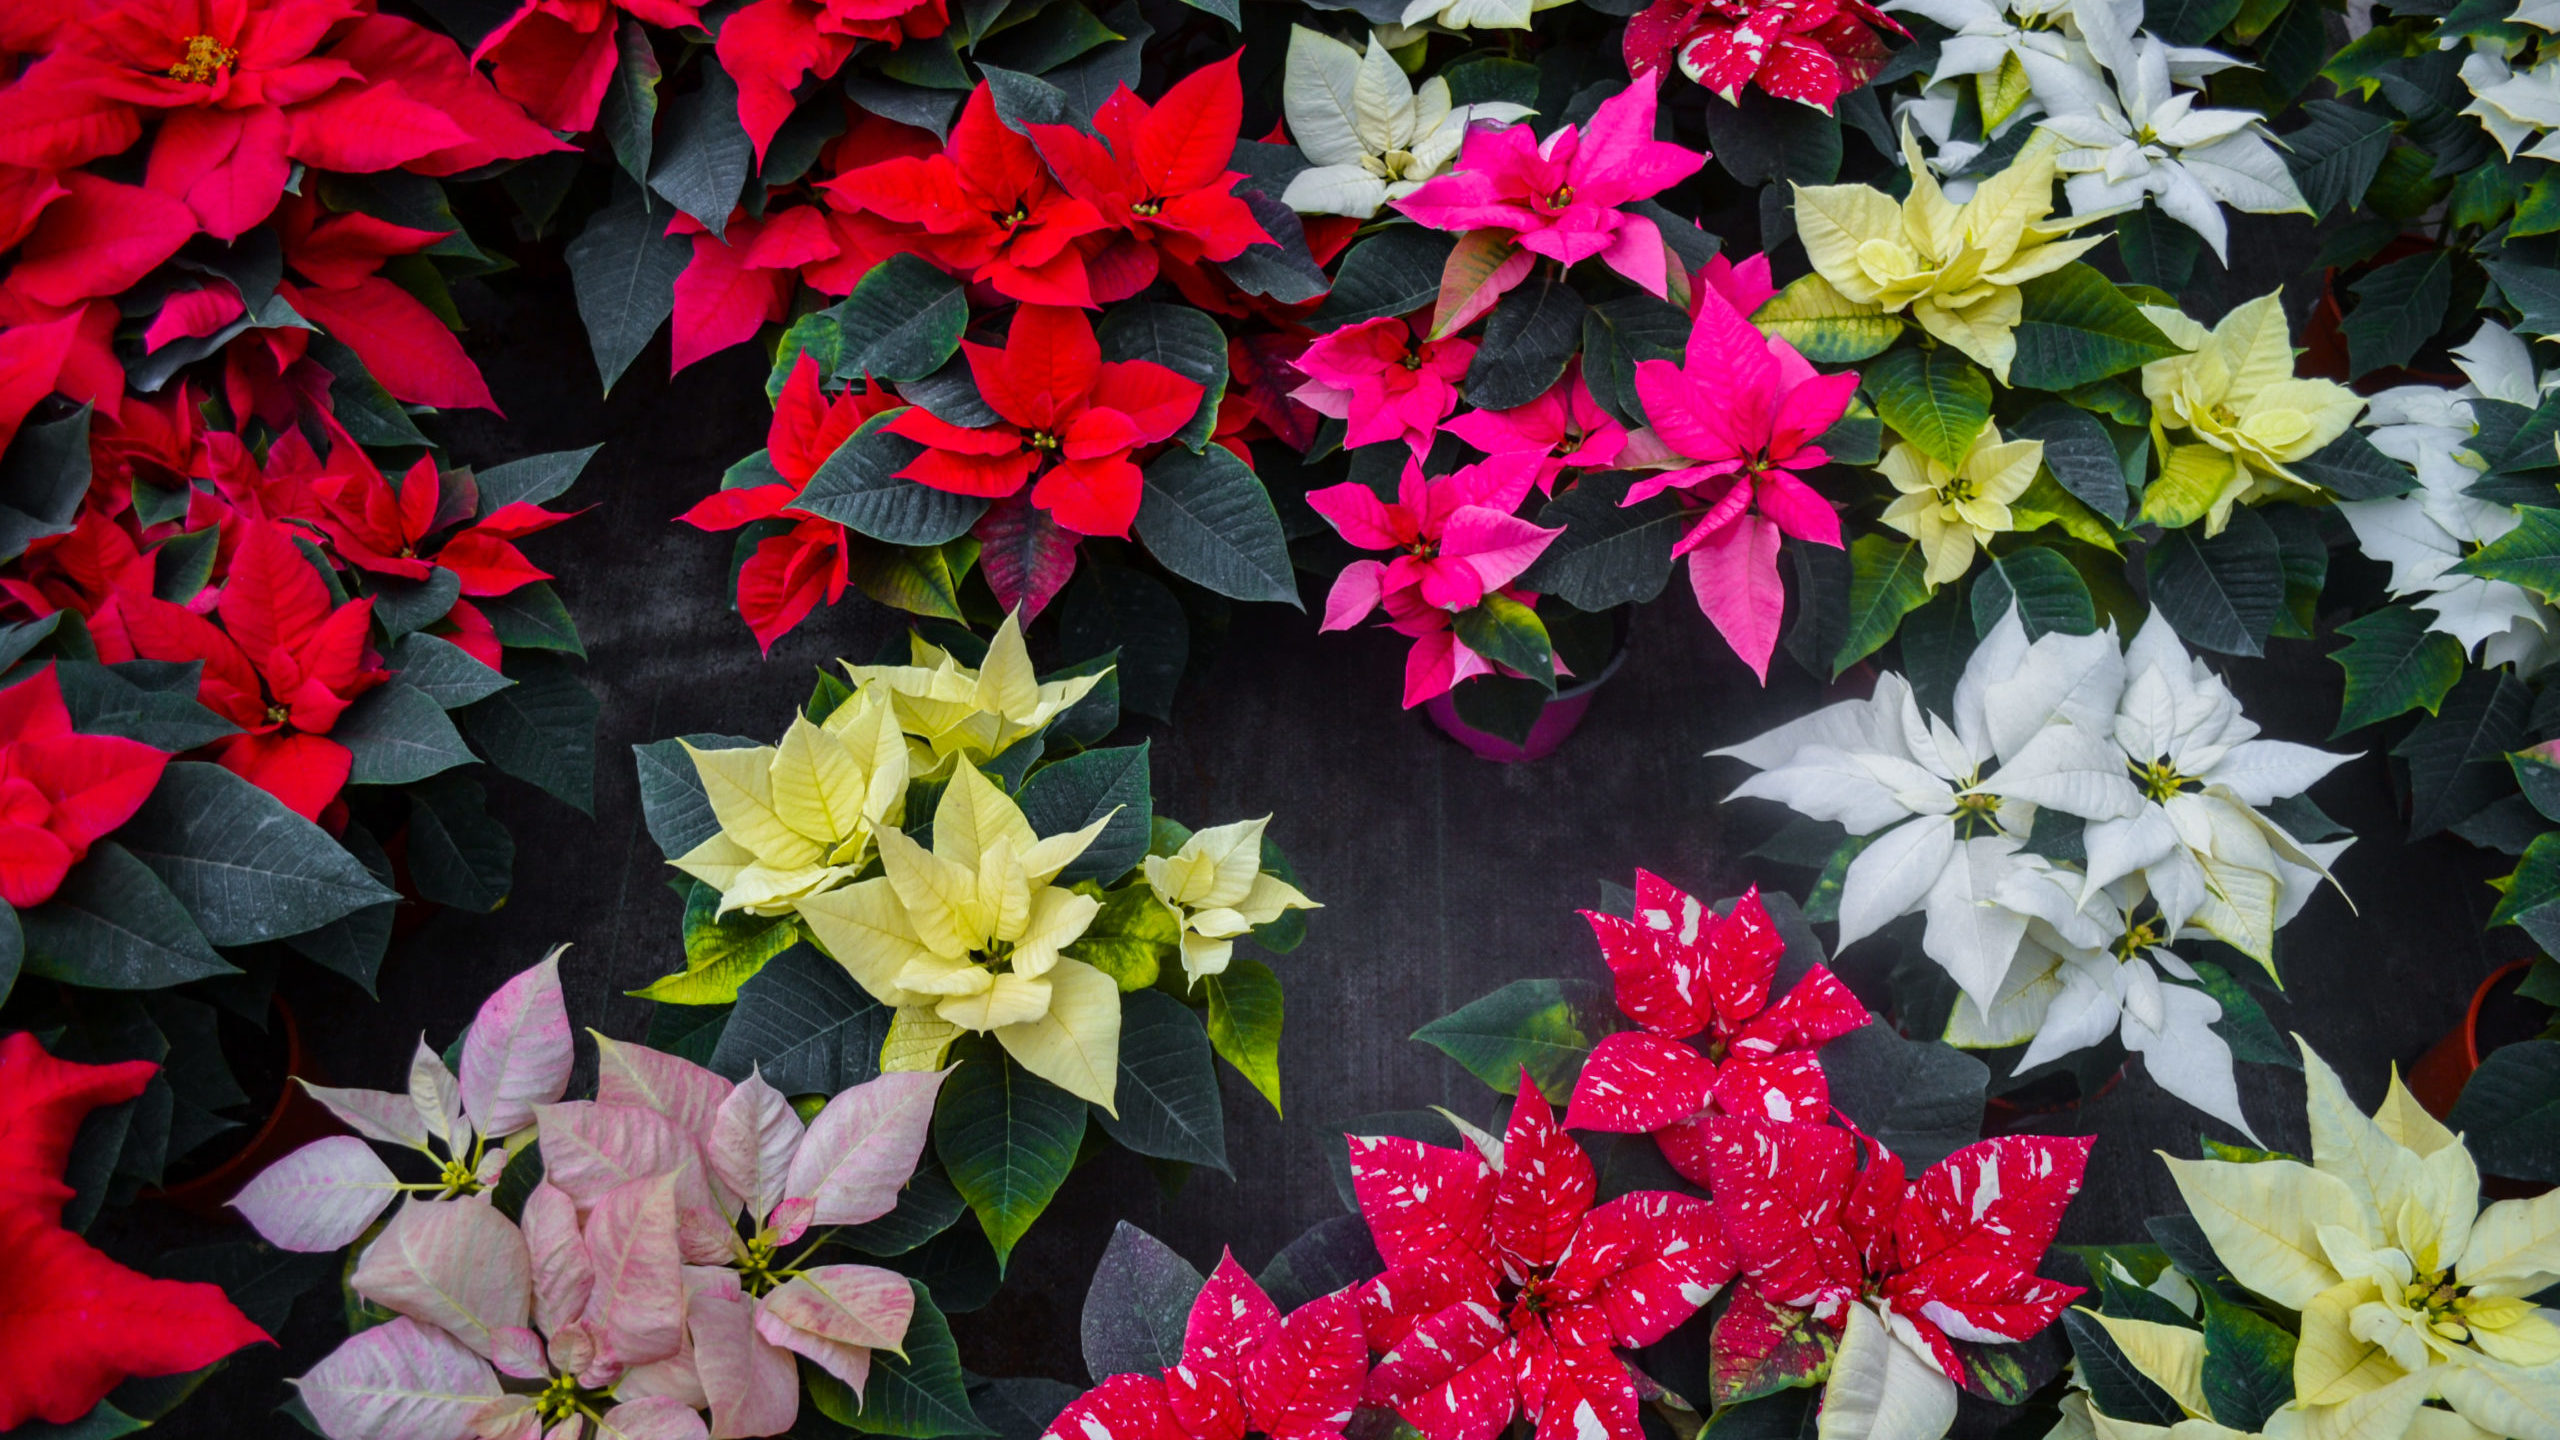 Utah State University Extension horticulturist, Taun Beddes shares how to keep your poinsettias hea...